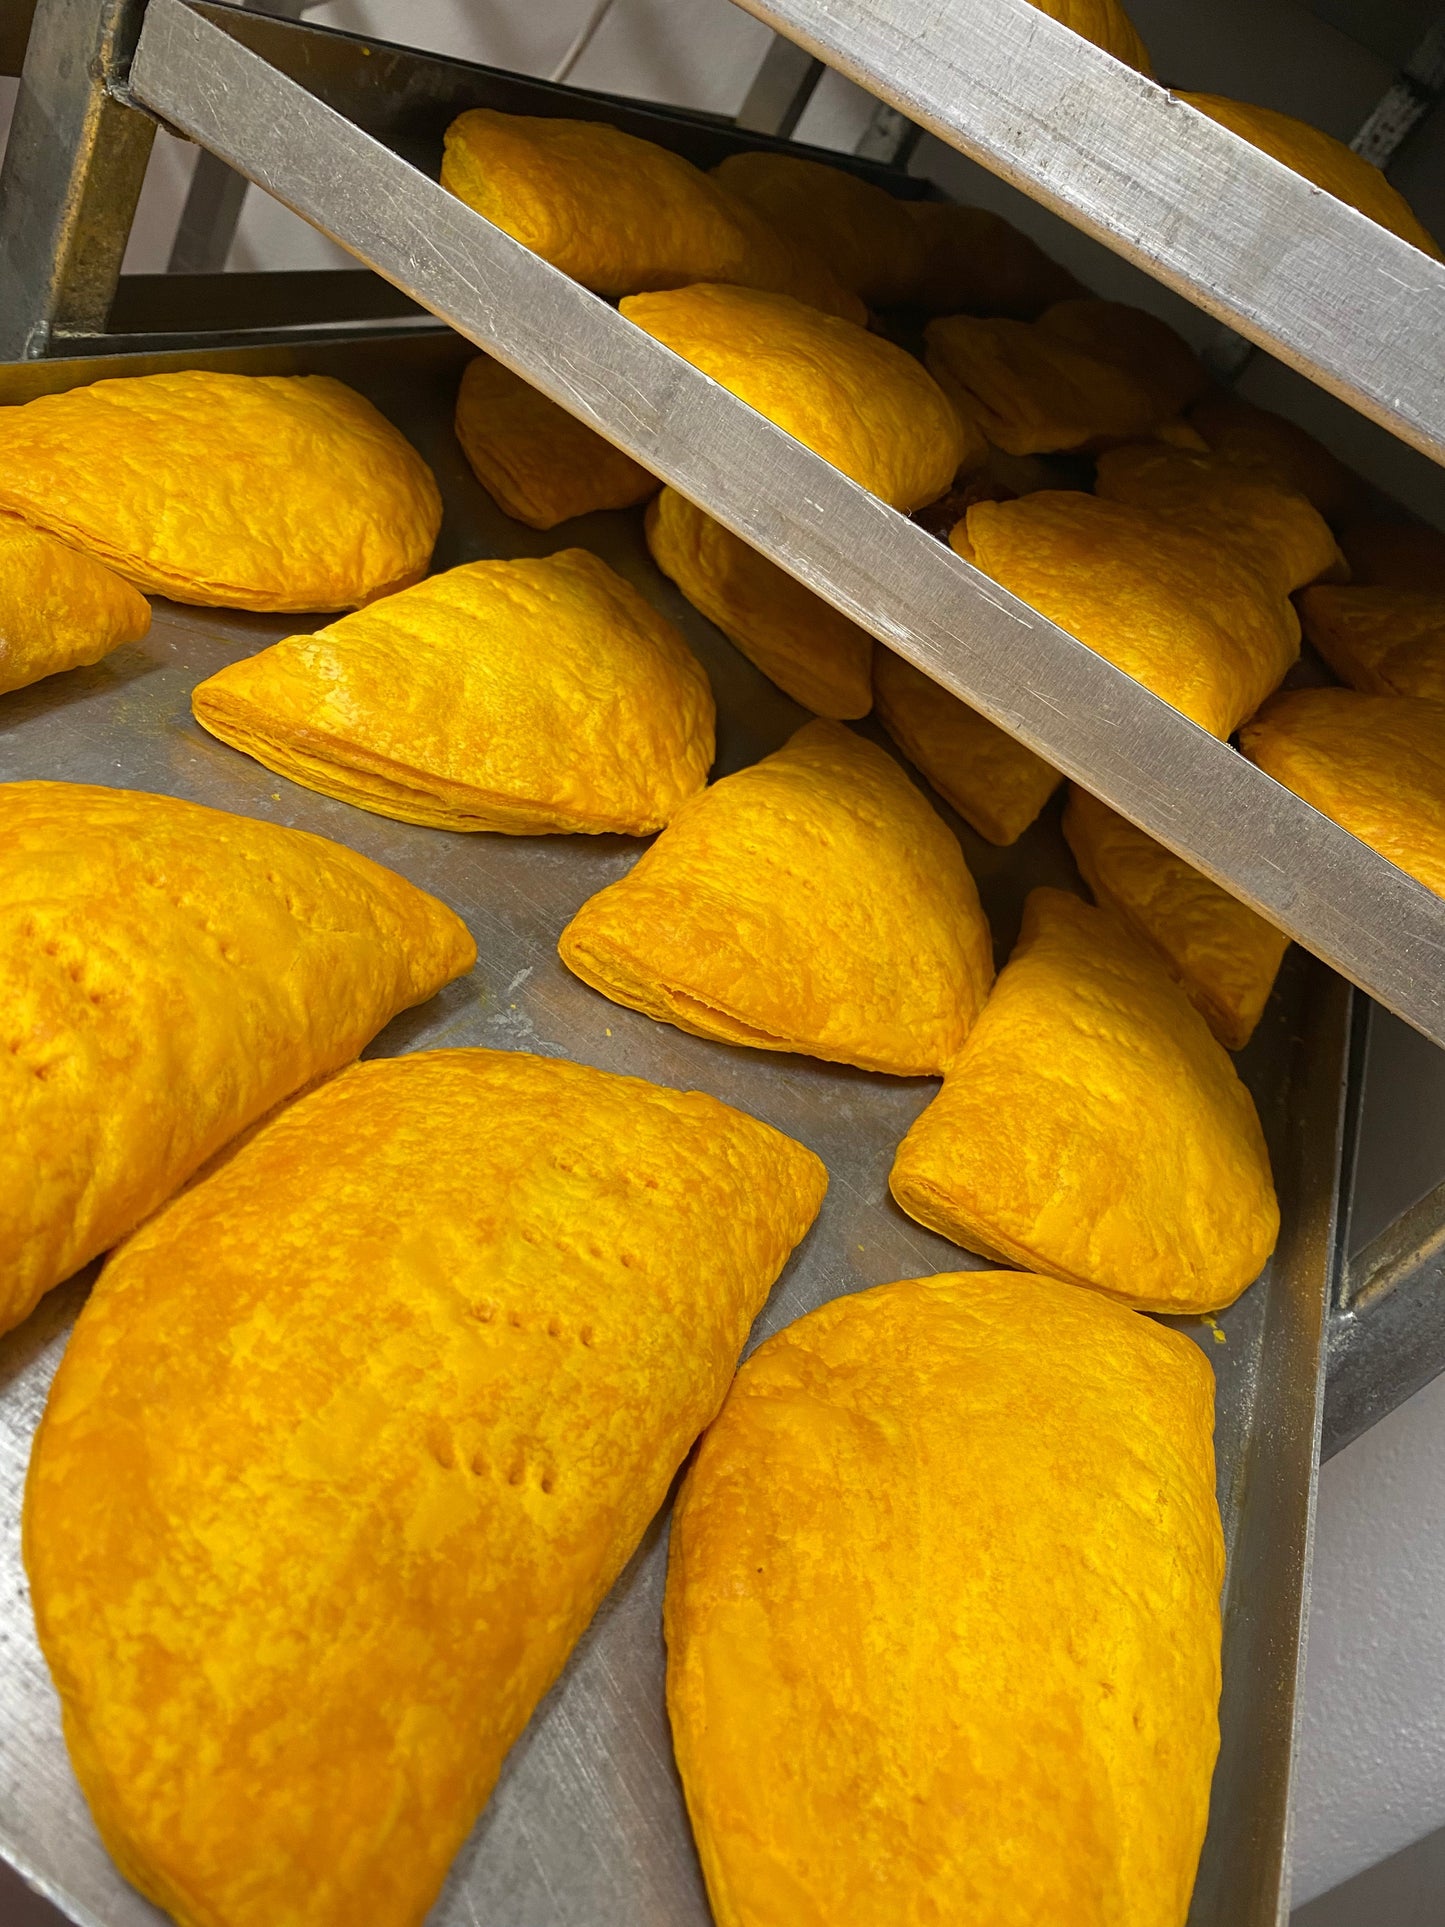 With delivery Sample Box Jamaican Patties